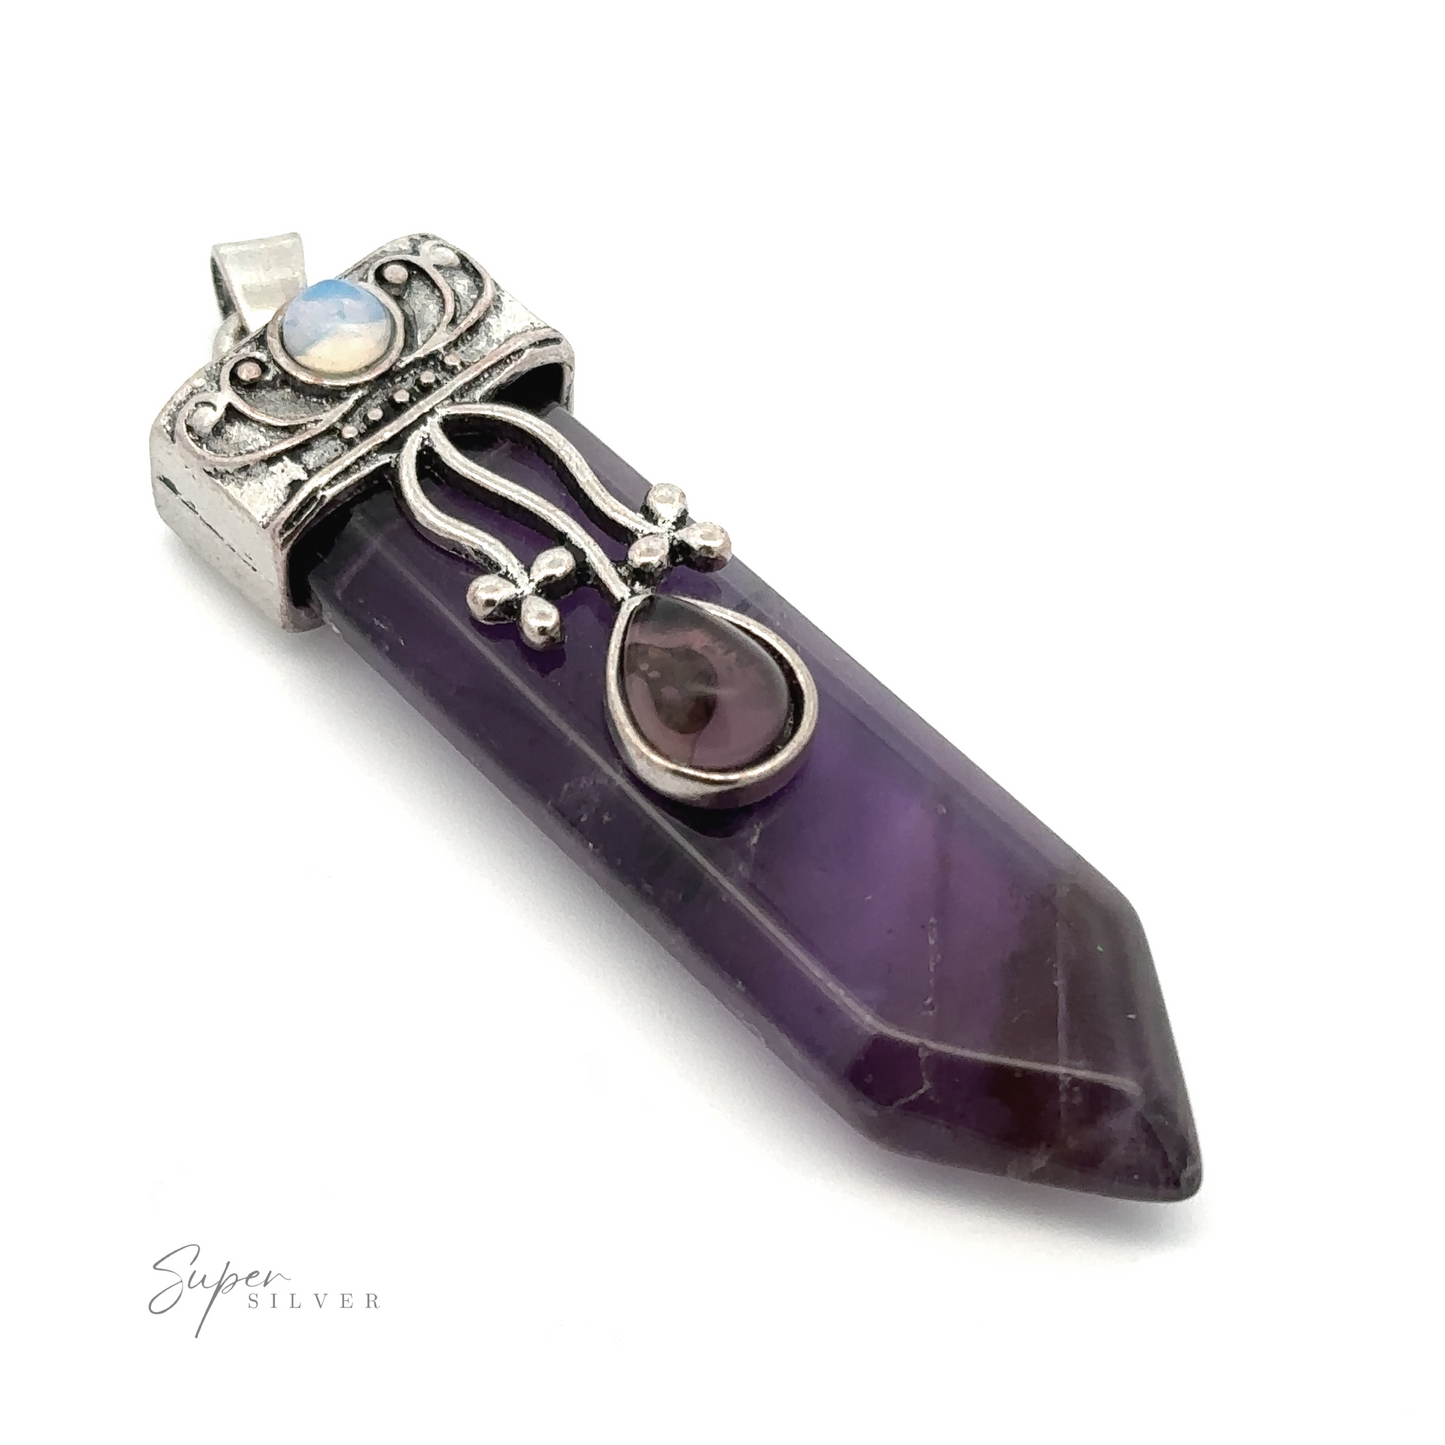 
                  
                    A Obelisk Crystal Stone Pendant with a purple crystal point, adorned with a smaller central amethyst and decorative metalwork, featuring an additional small opalite round stone at the top.
                  
                